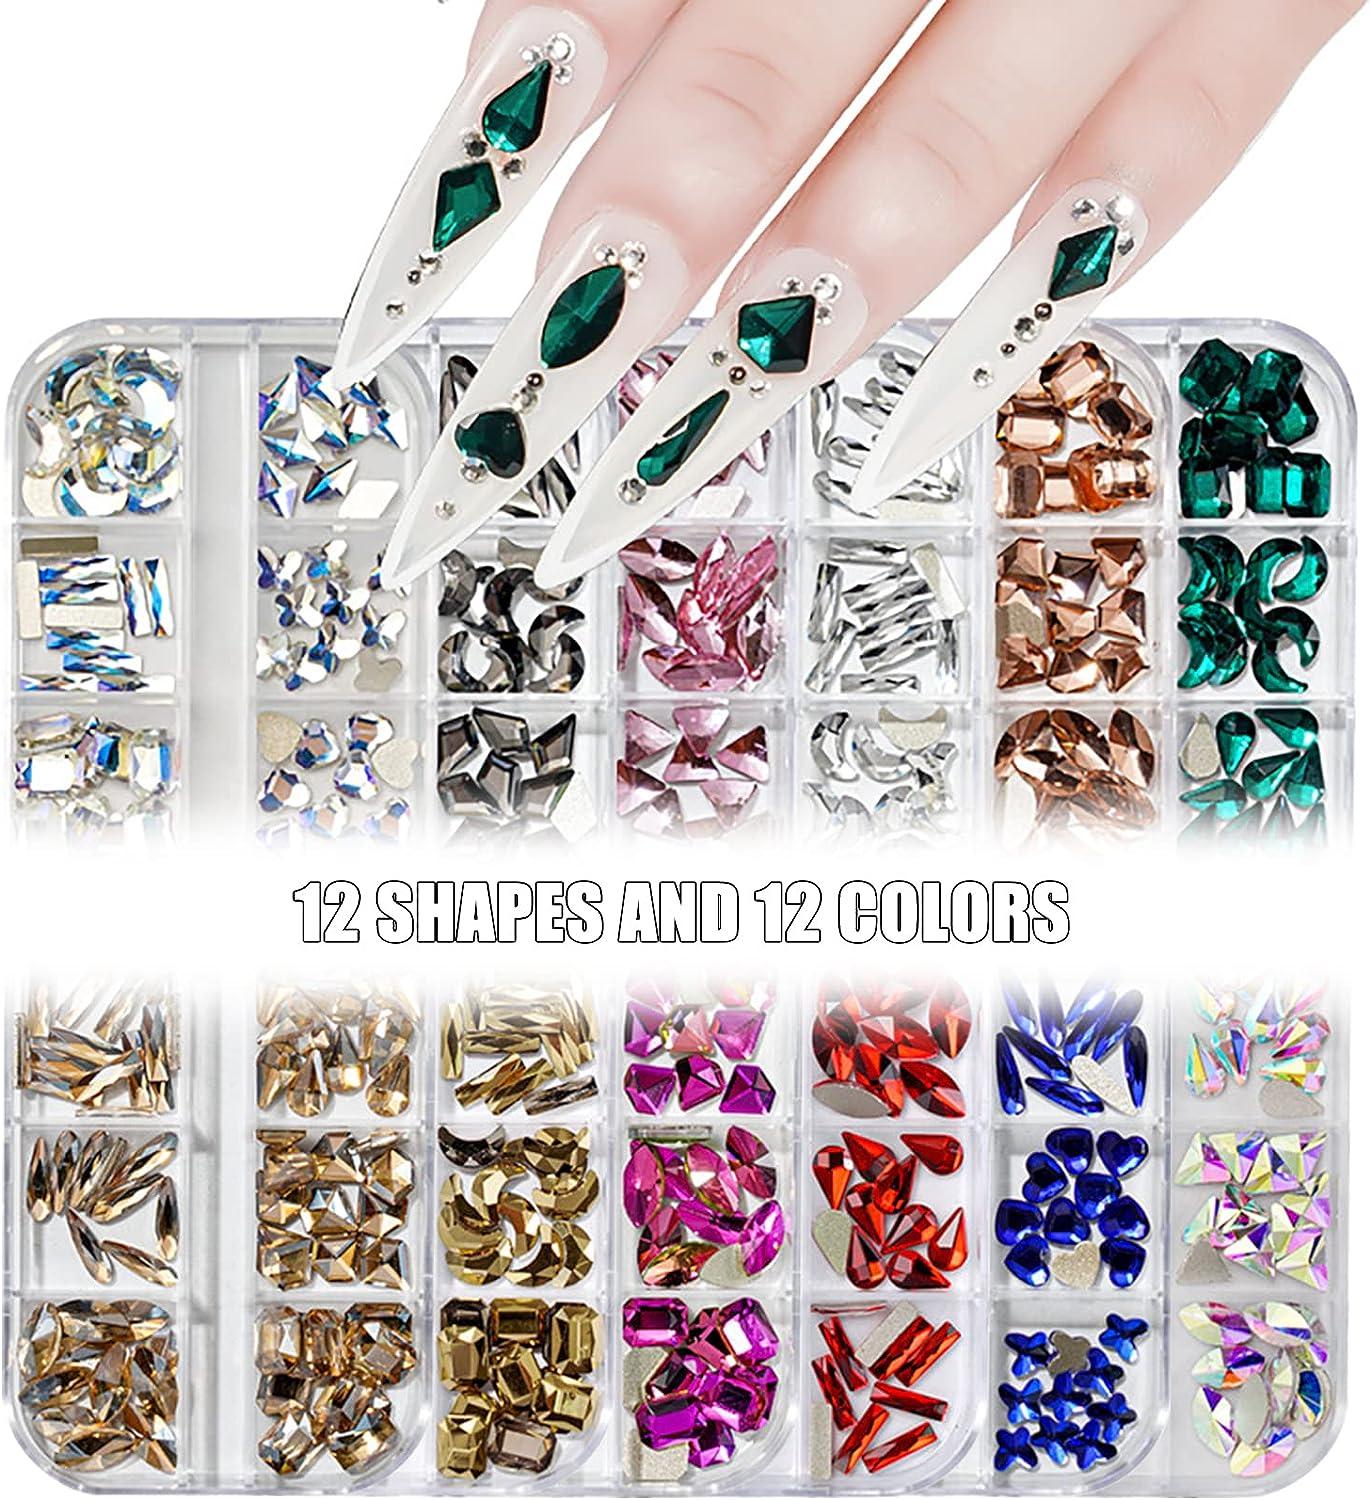 Mixed Colorful Rhinestones For Nails 3D Crystal Stones For Women Nail Art  Decorations Diy Design